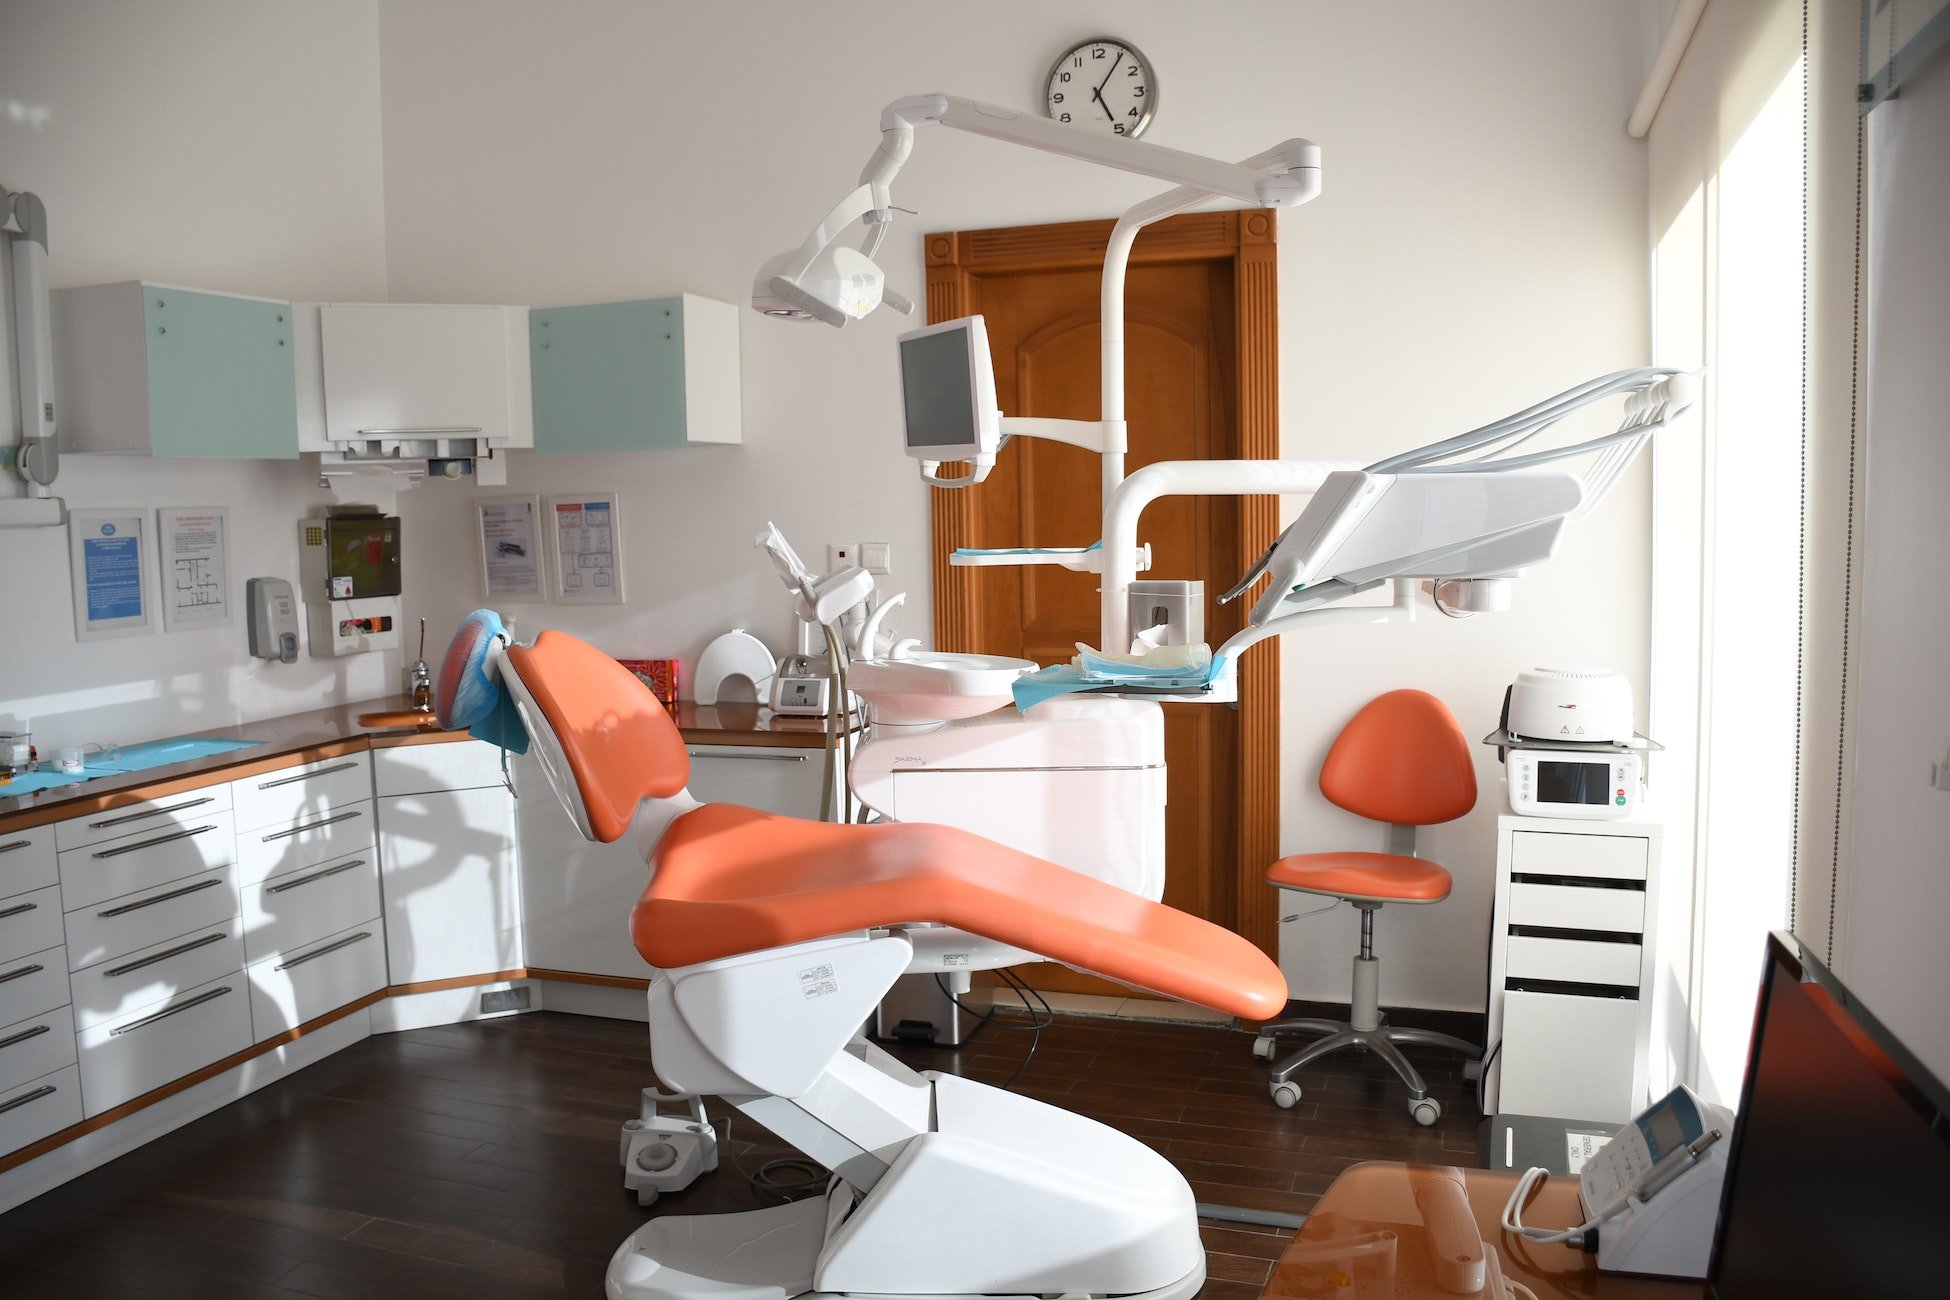 5 Considerations When Choosing a Dental Practice Name